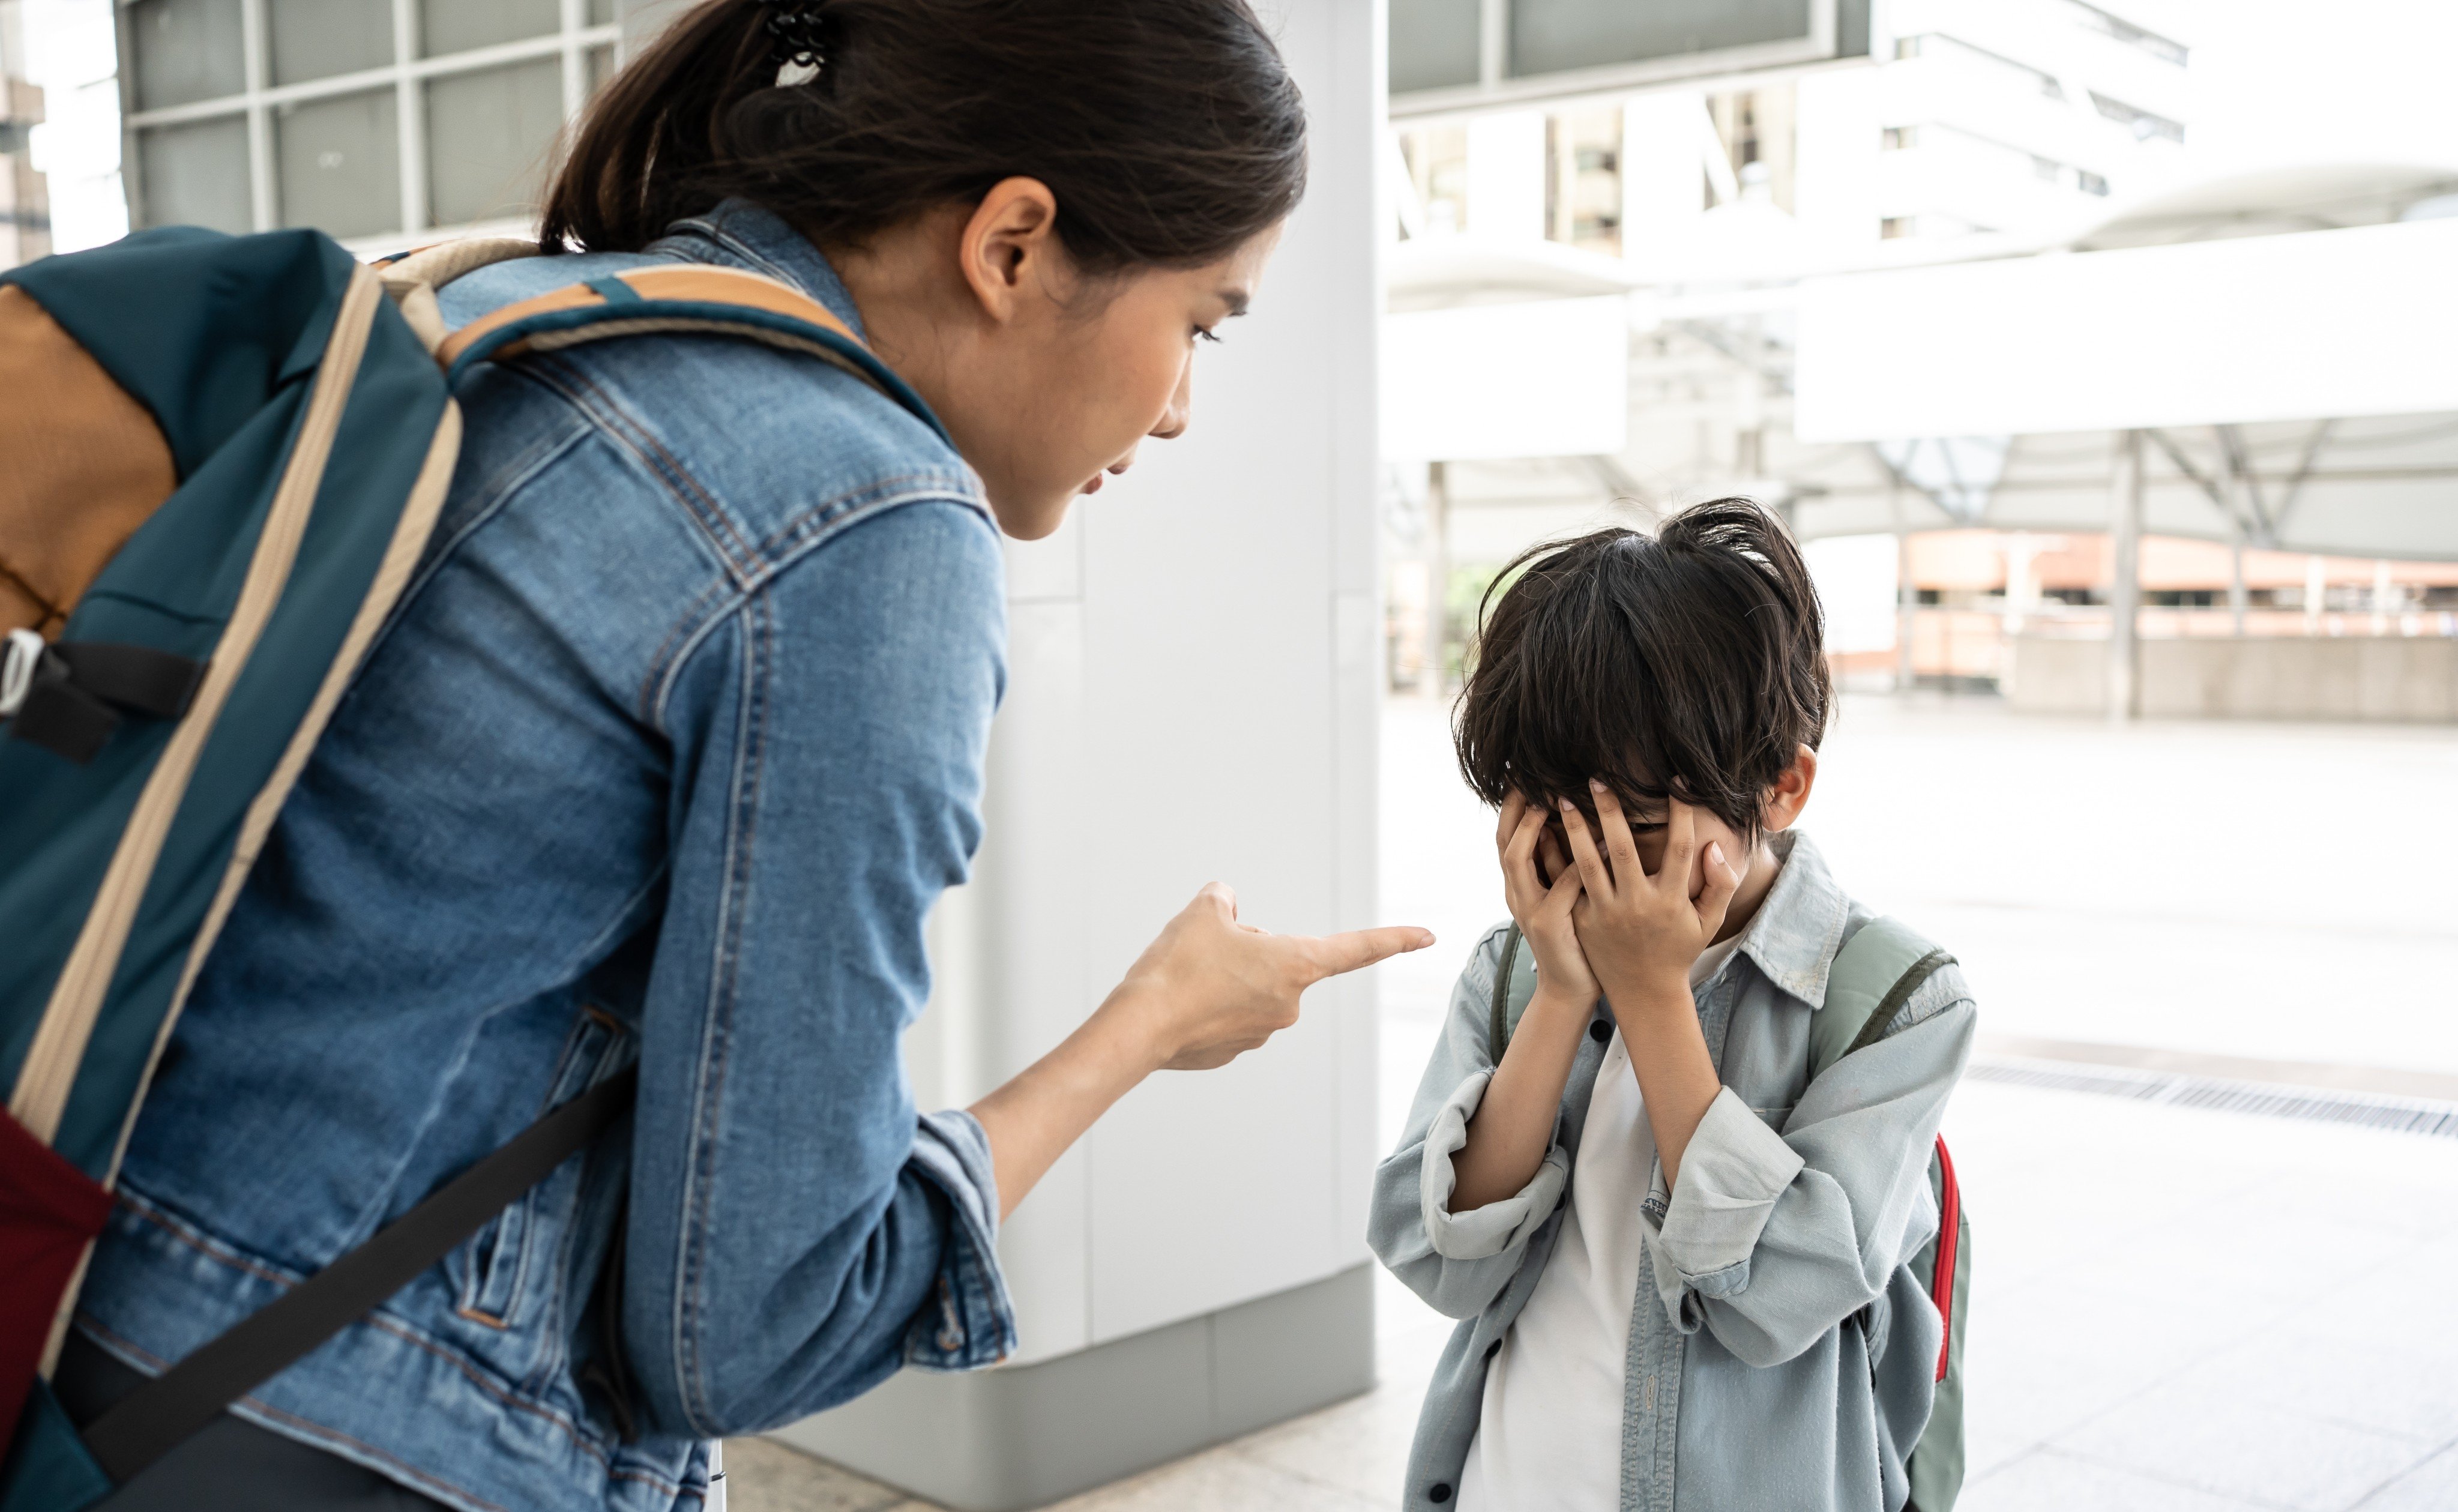 Hong Kong officials plan to enact the Mandatory Reporting of Child Abuse Bill by the end of next year. Photo: Shutterstock